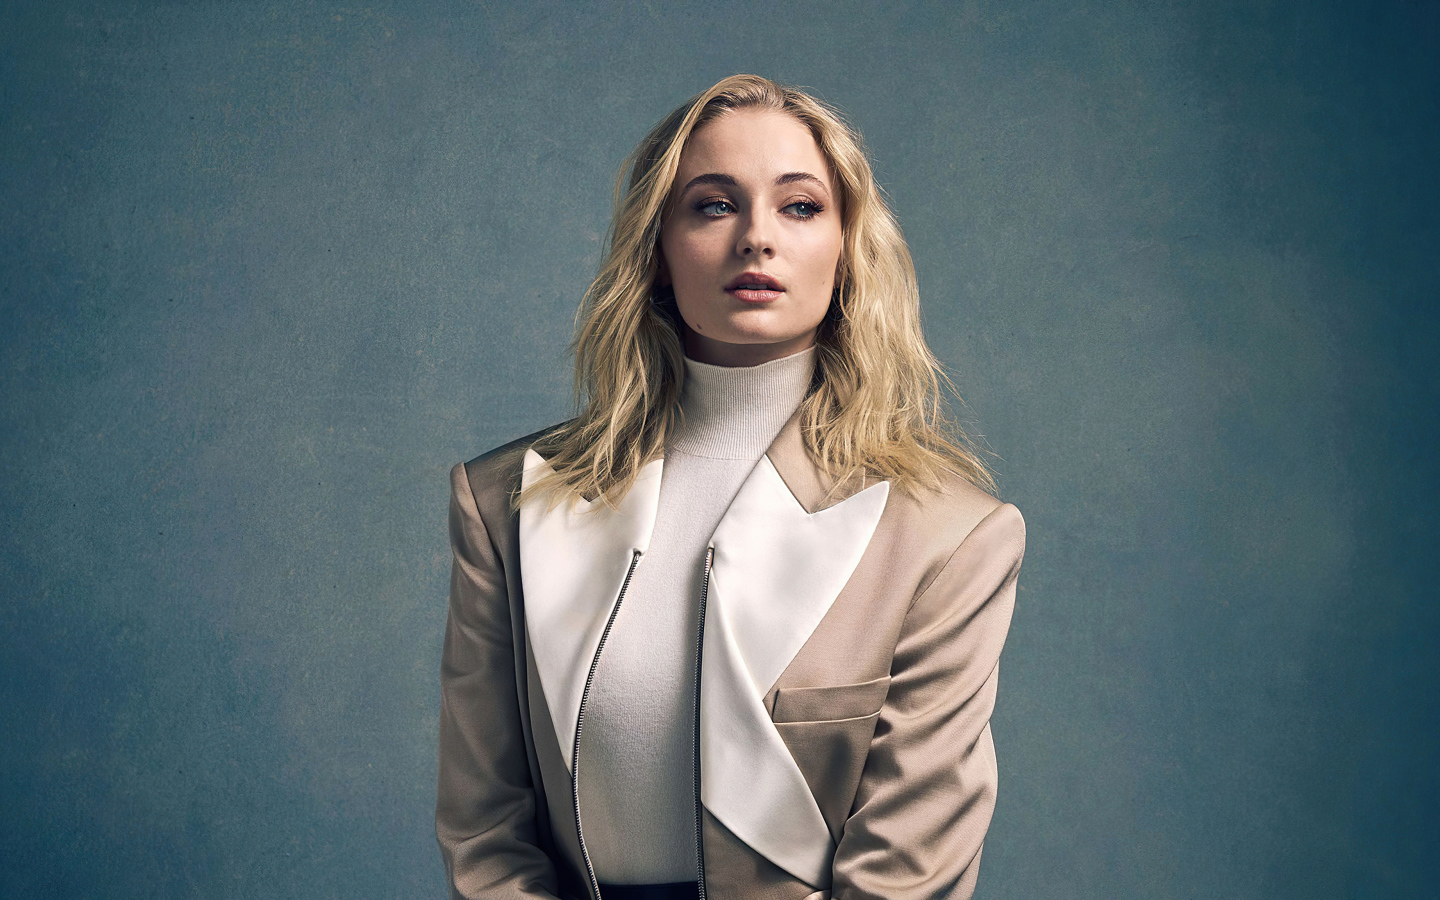 Actress Sophie Turner in a suit on a gray background